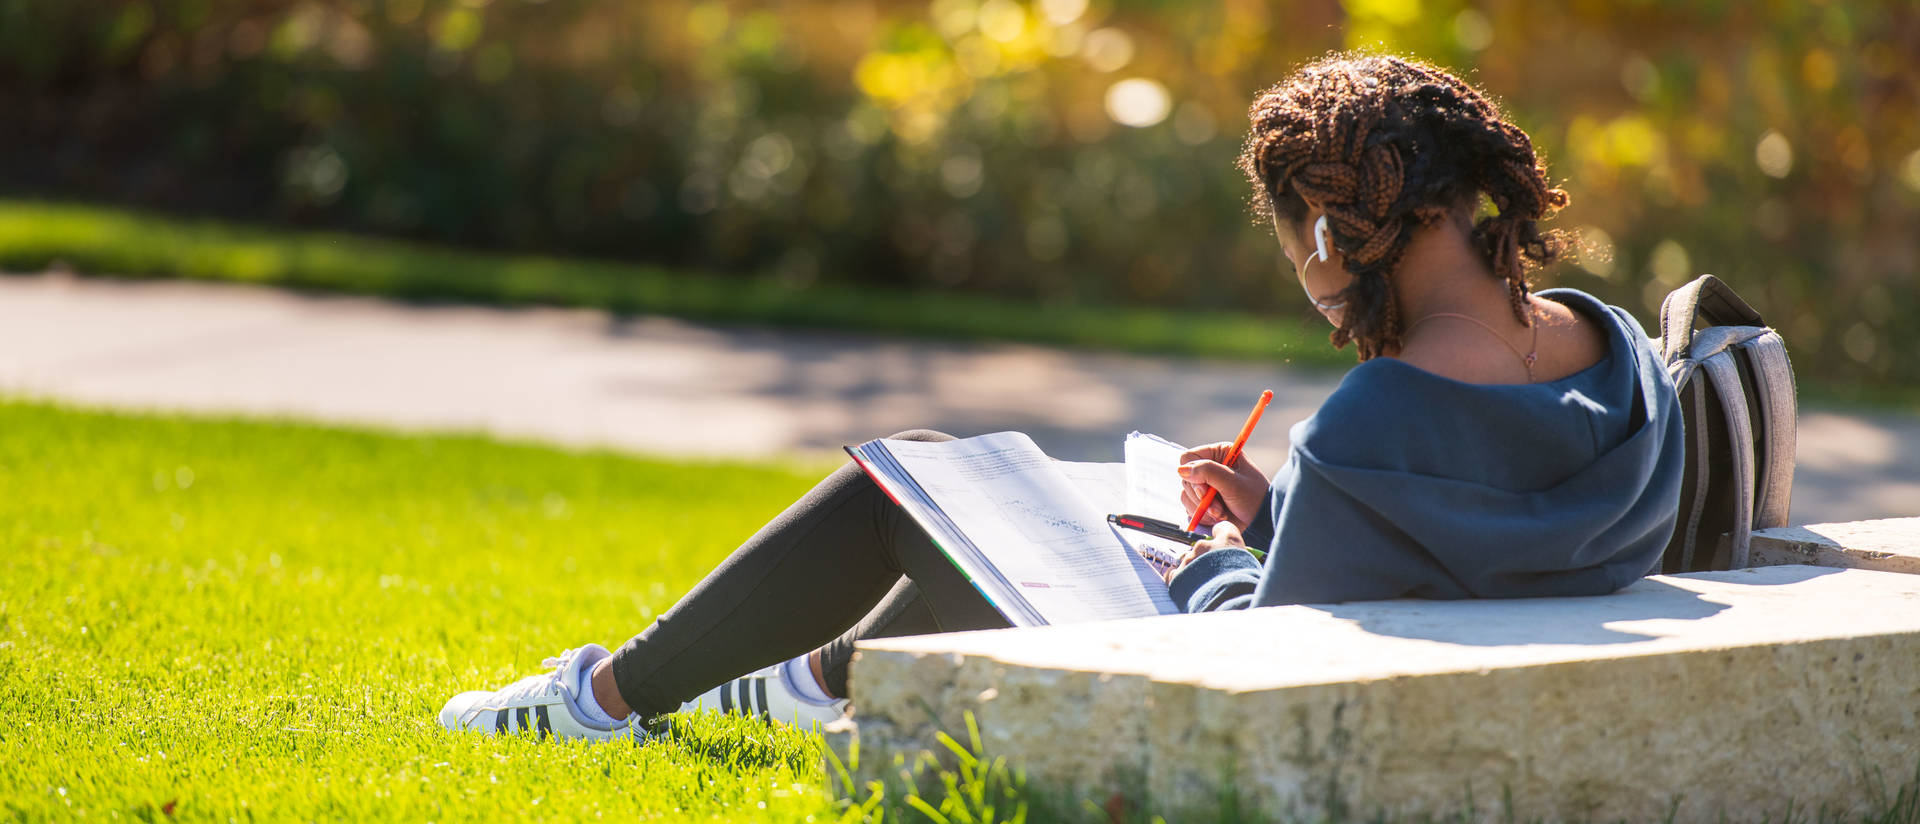 Student studies outside on the campus lawn.